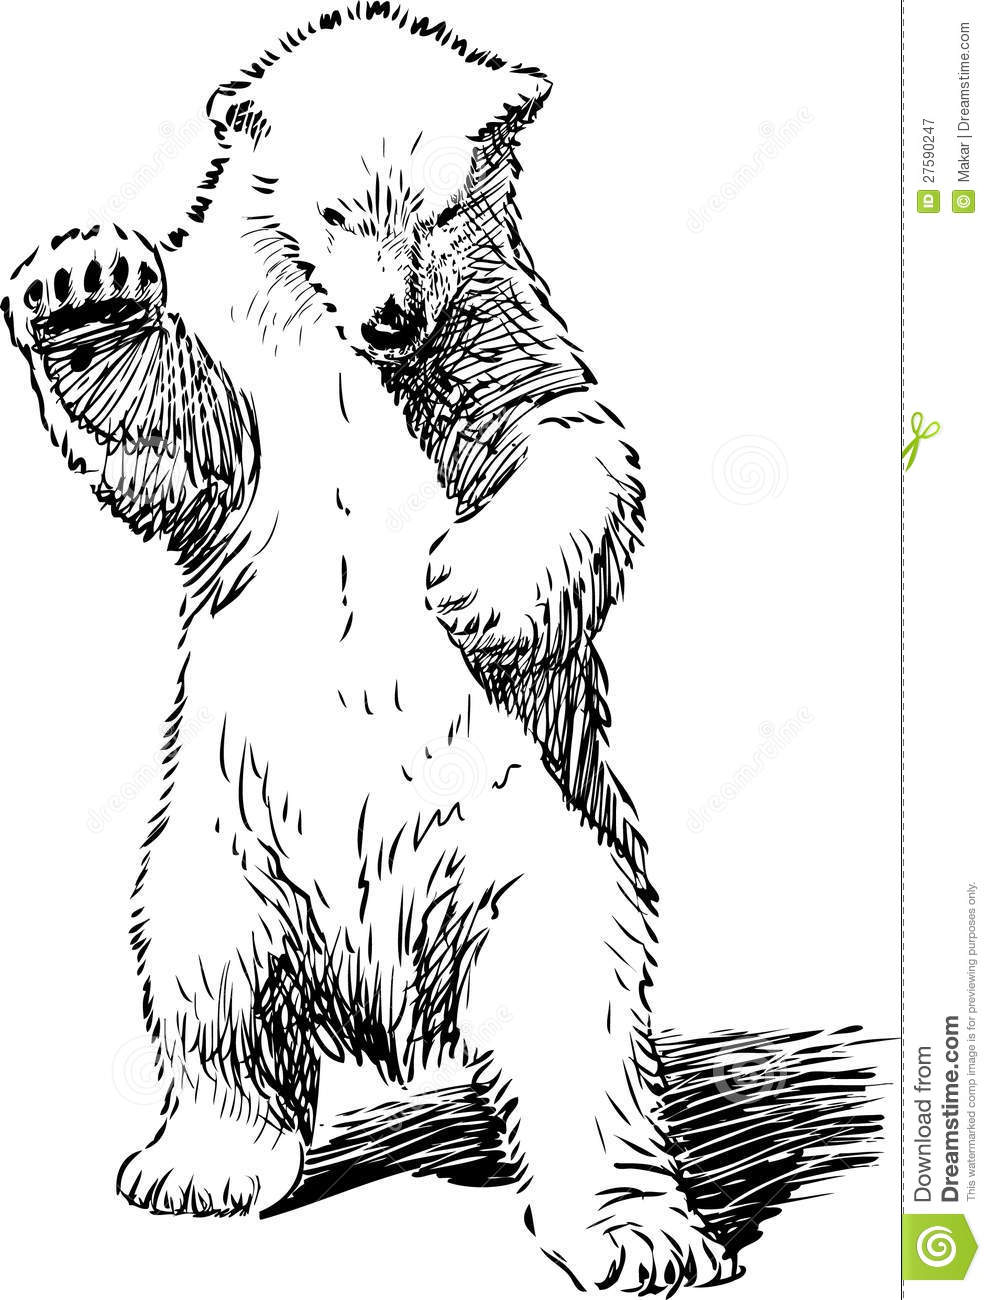 Bear Standing On Hind Legs Royalty Free Stock Photography   Image